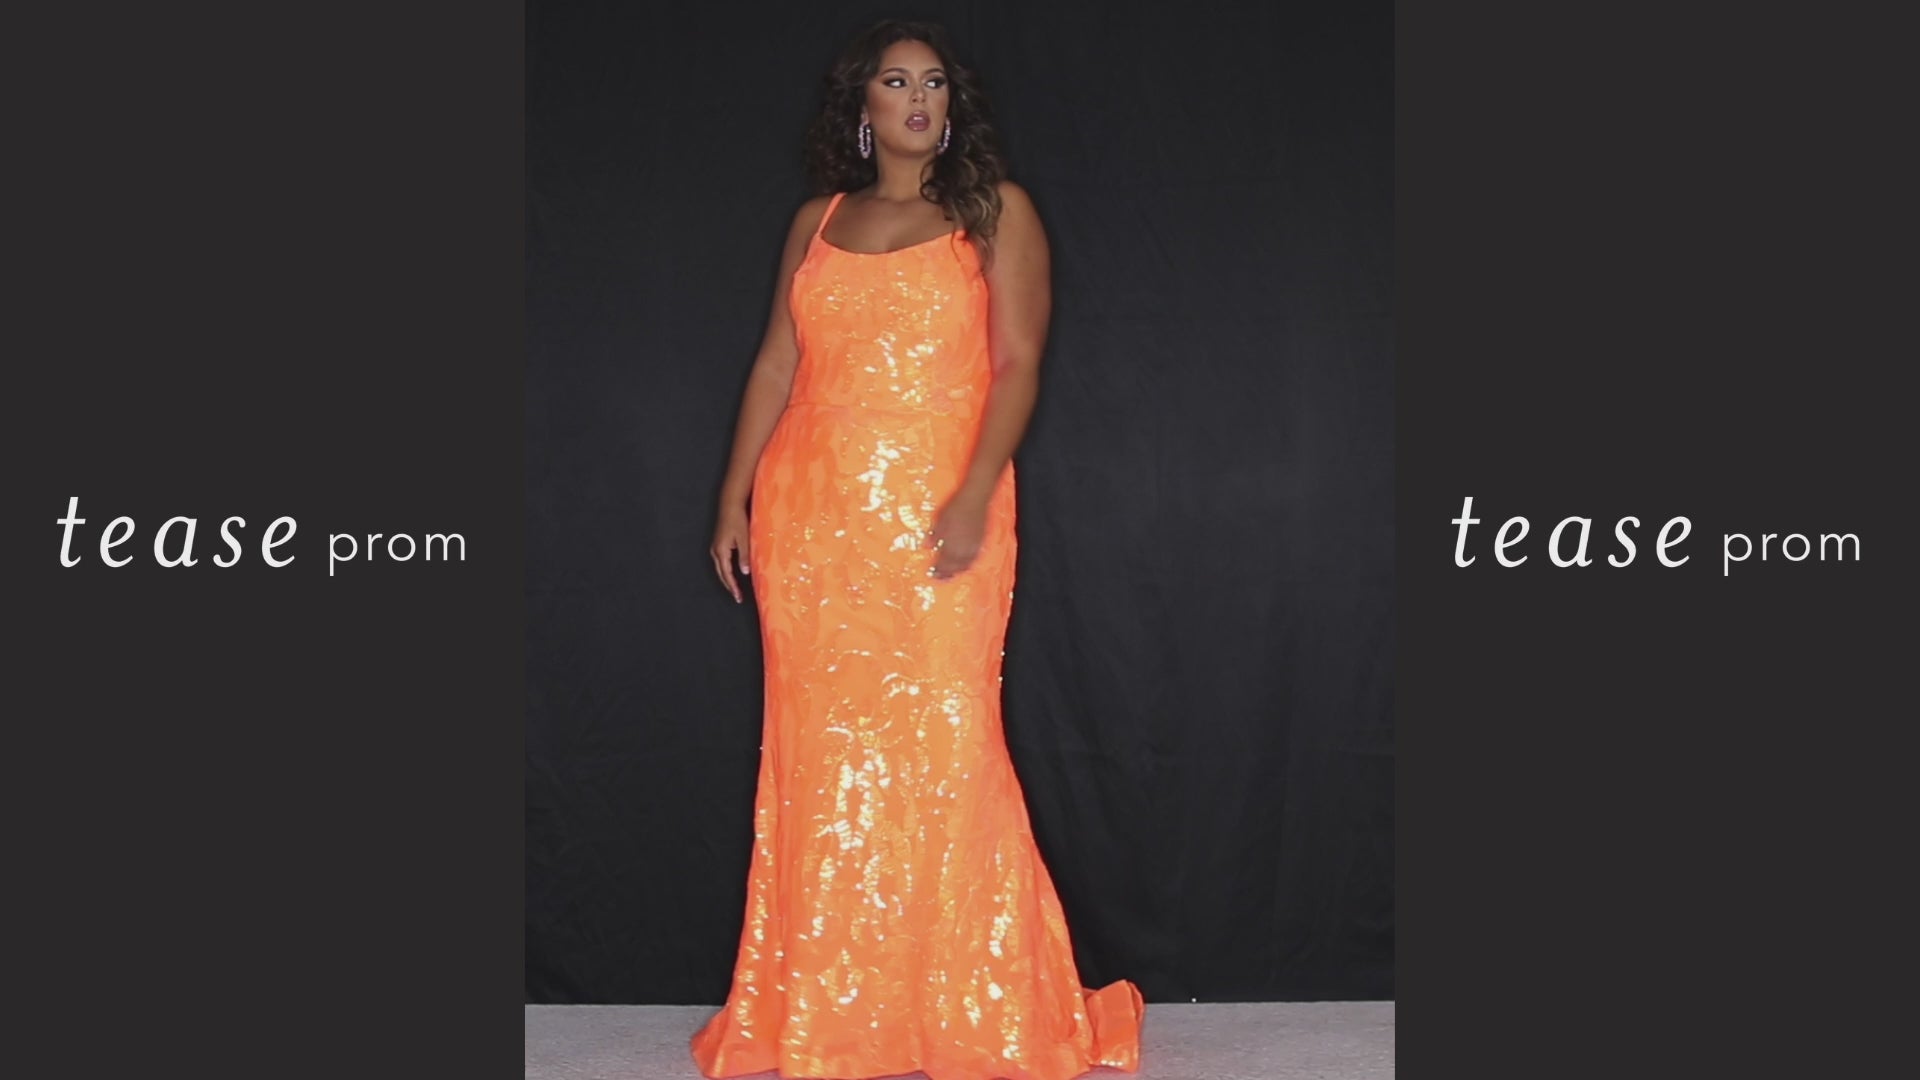 Tease Prom TE2307 Tangelo Orange and Ice Blue. Slim A-line silhouette with a scoop neckline and ½ inch straps covered in lace. Scoop back and a center back zipper. Sequins over stretch knit 5 inch train 2 inch horsehair hem.